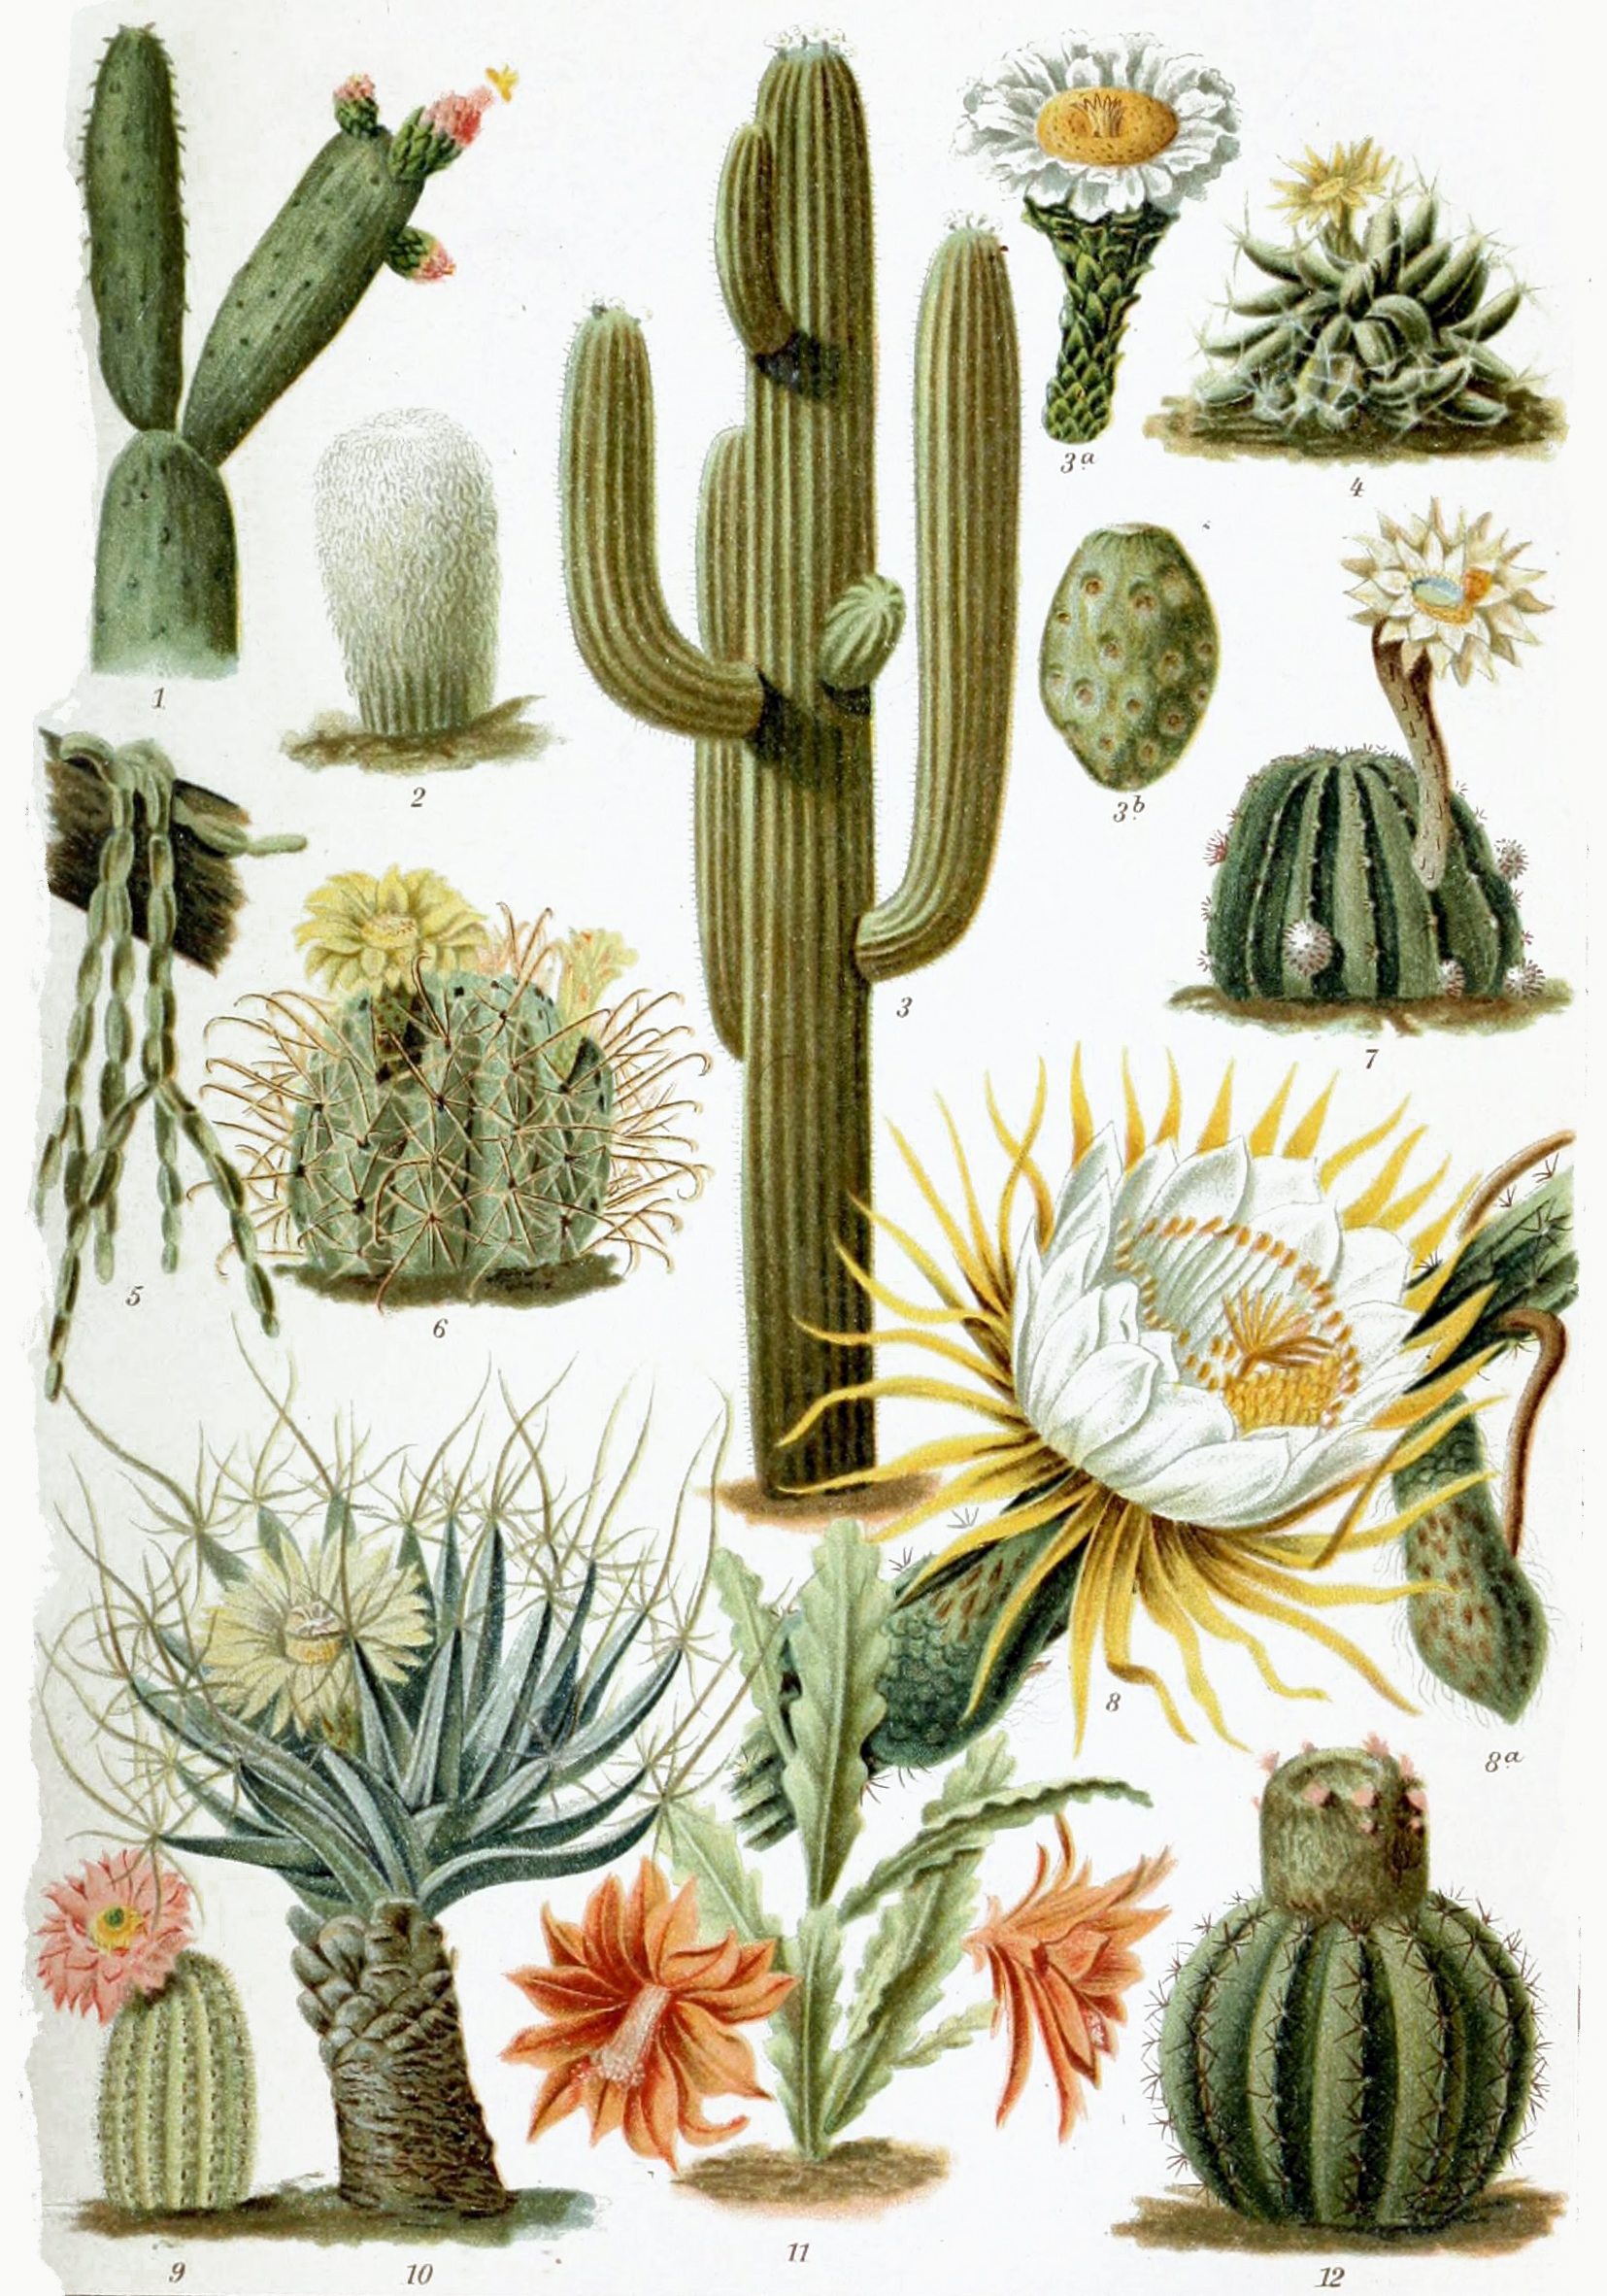 Cactus | Horticulture and Soil Science Wiki | FANDOM powered by Wikia